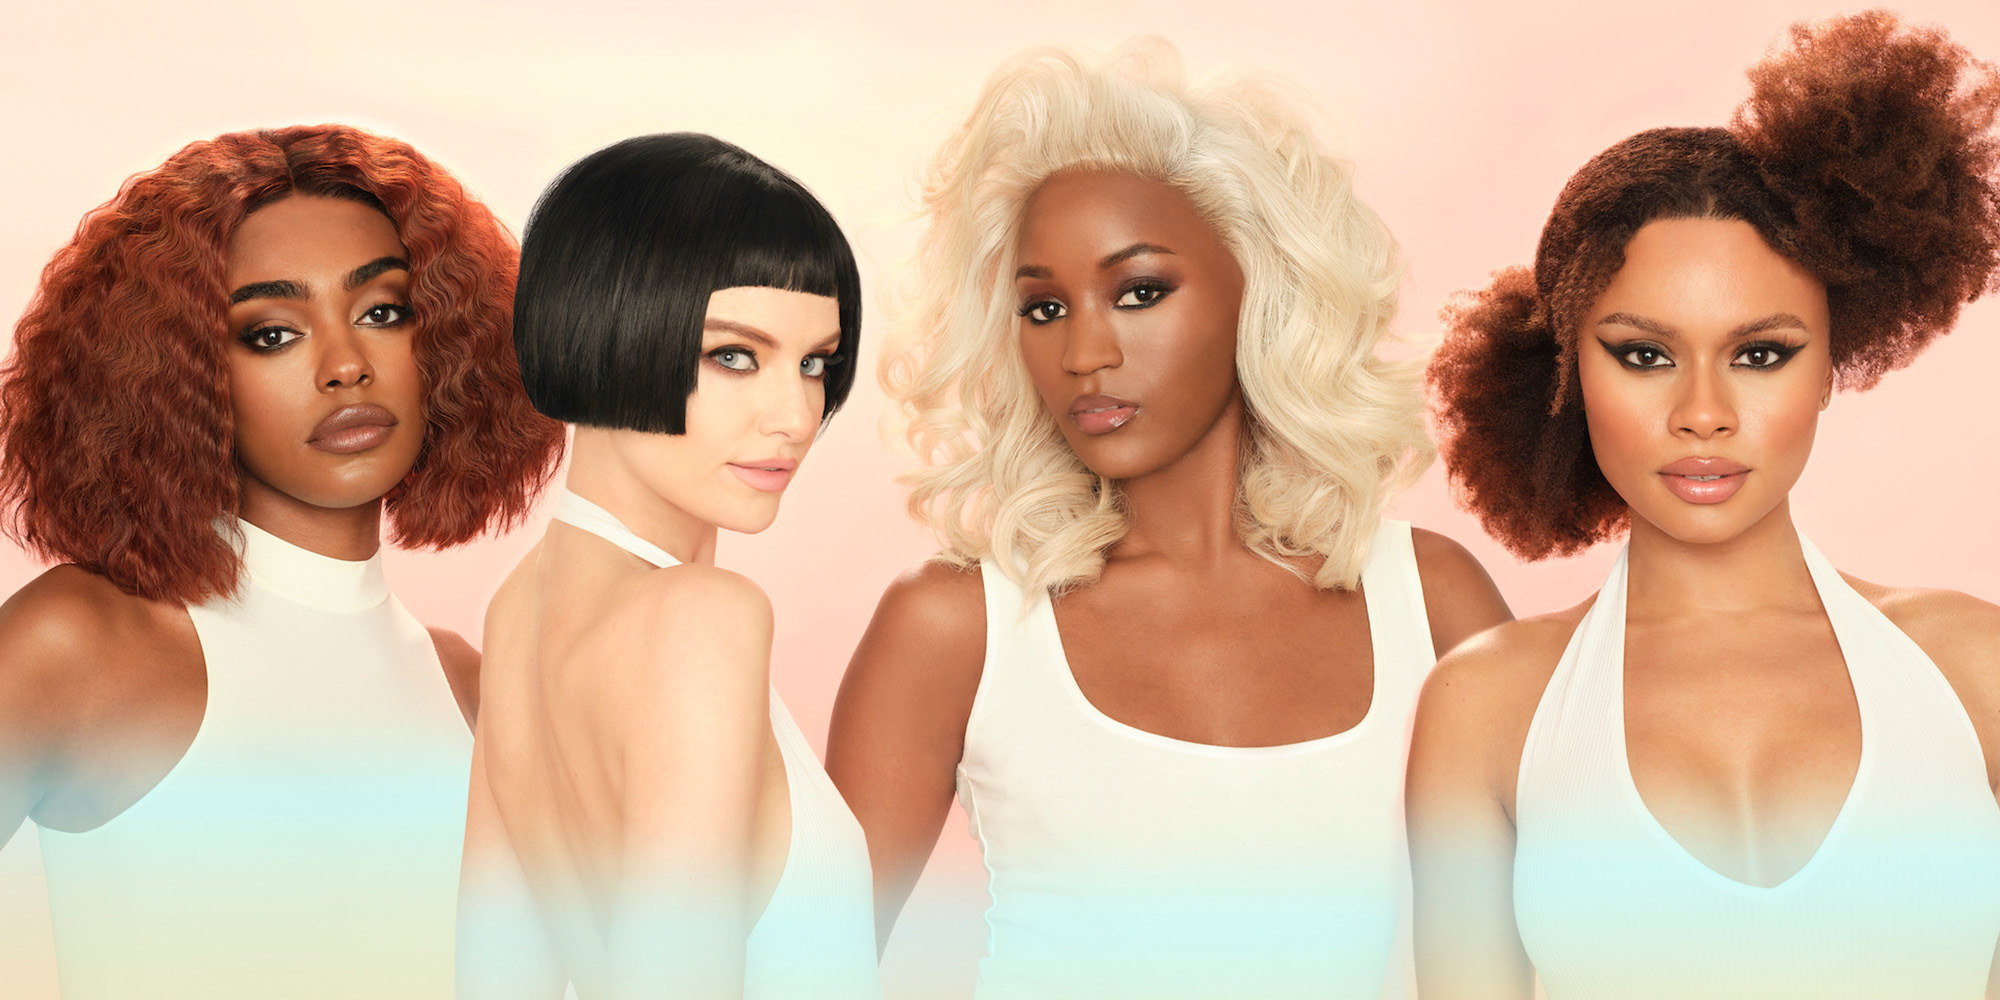 DTC Brand Parfait Offers AI-Powered Wig Customization Technology To Other Brands